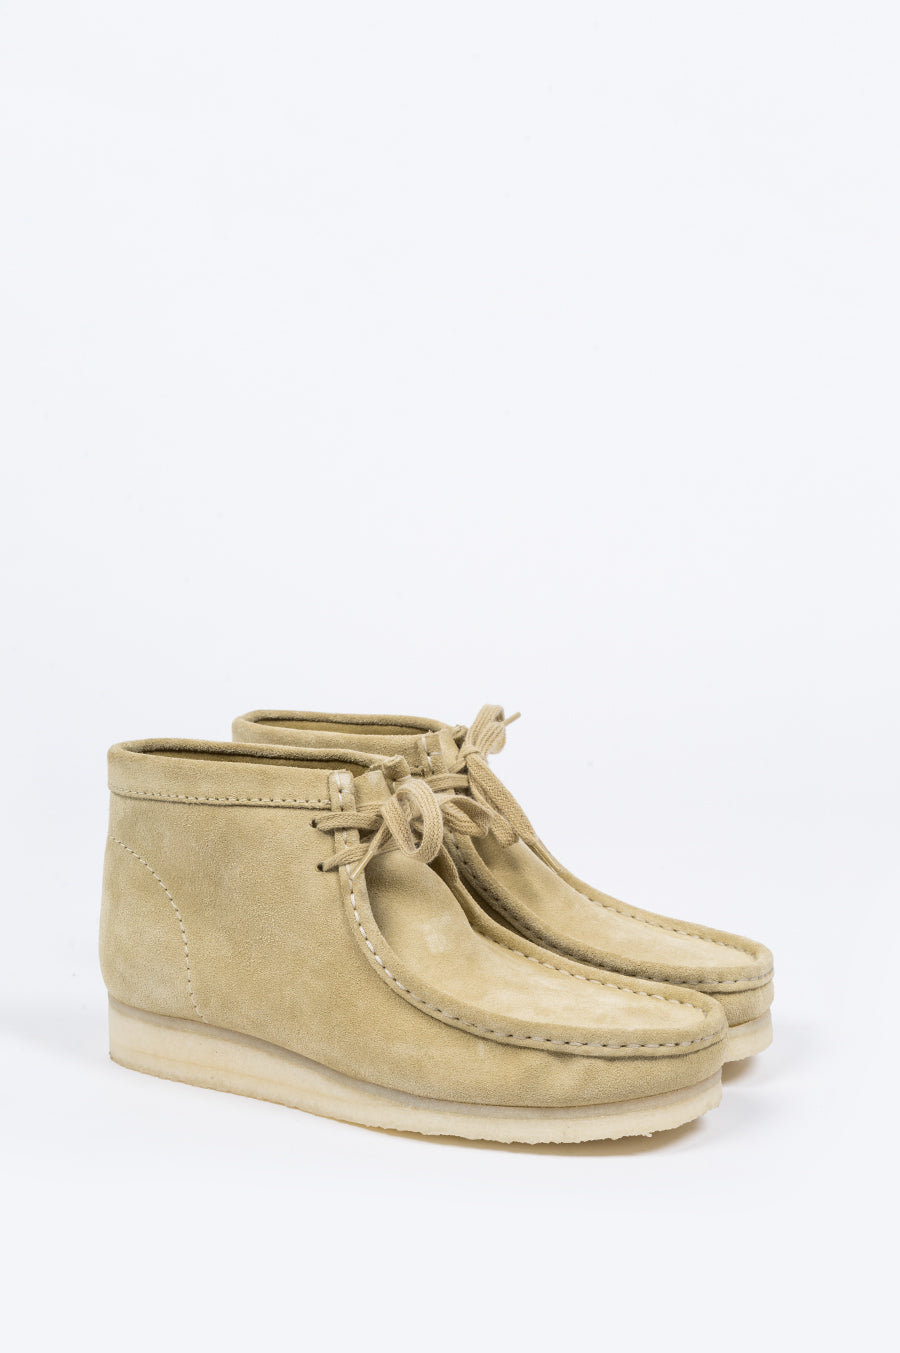 CLARKS WALLABEE BOOT MAPLE - BLENDS